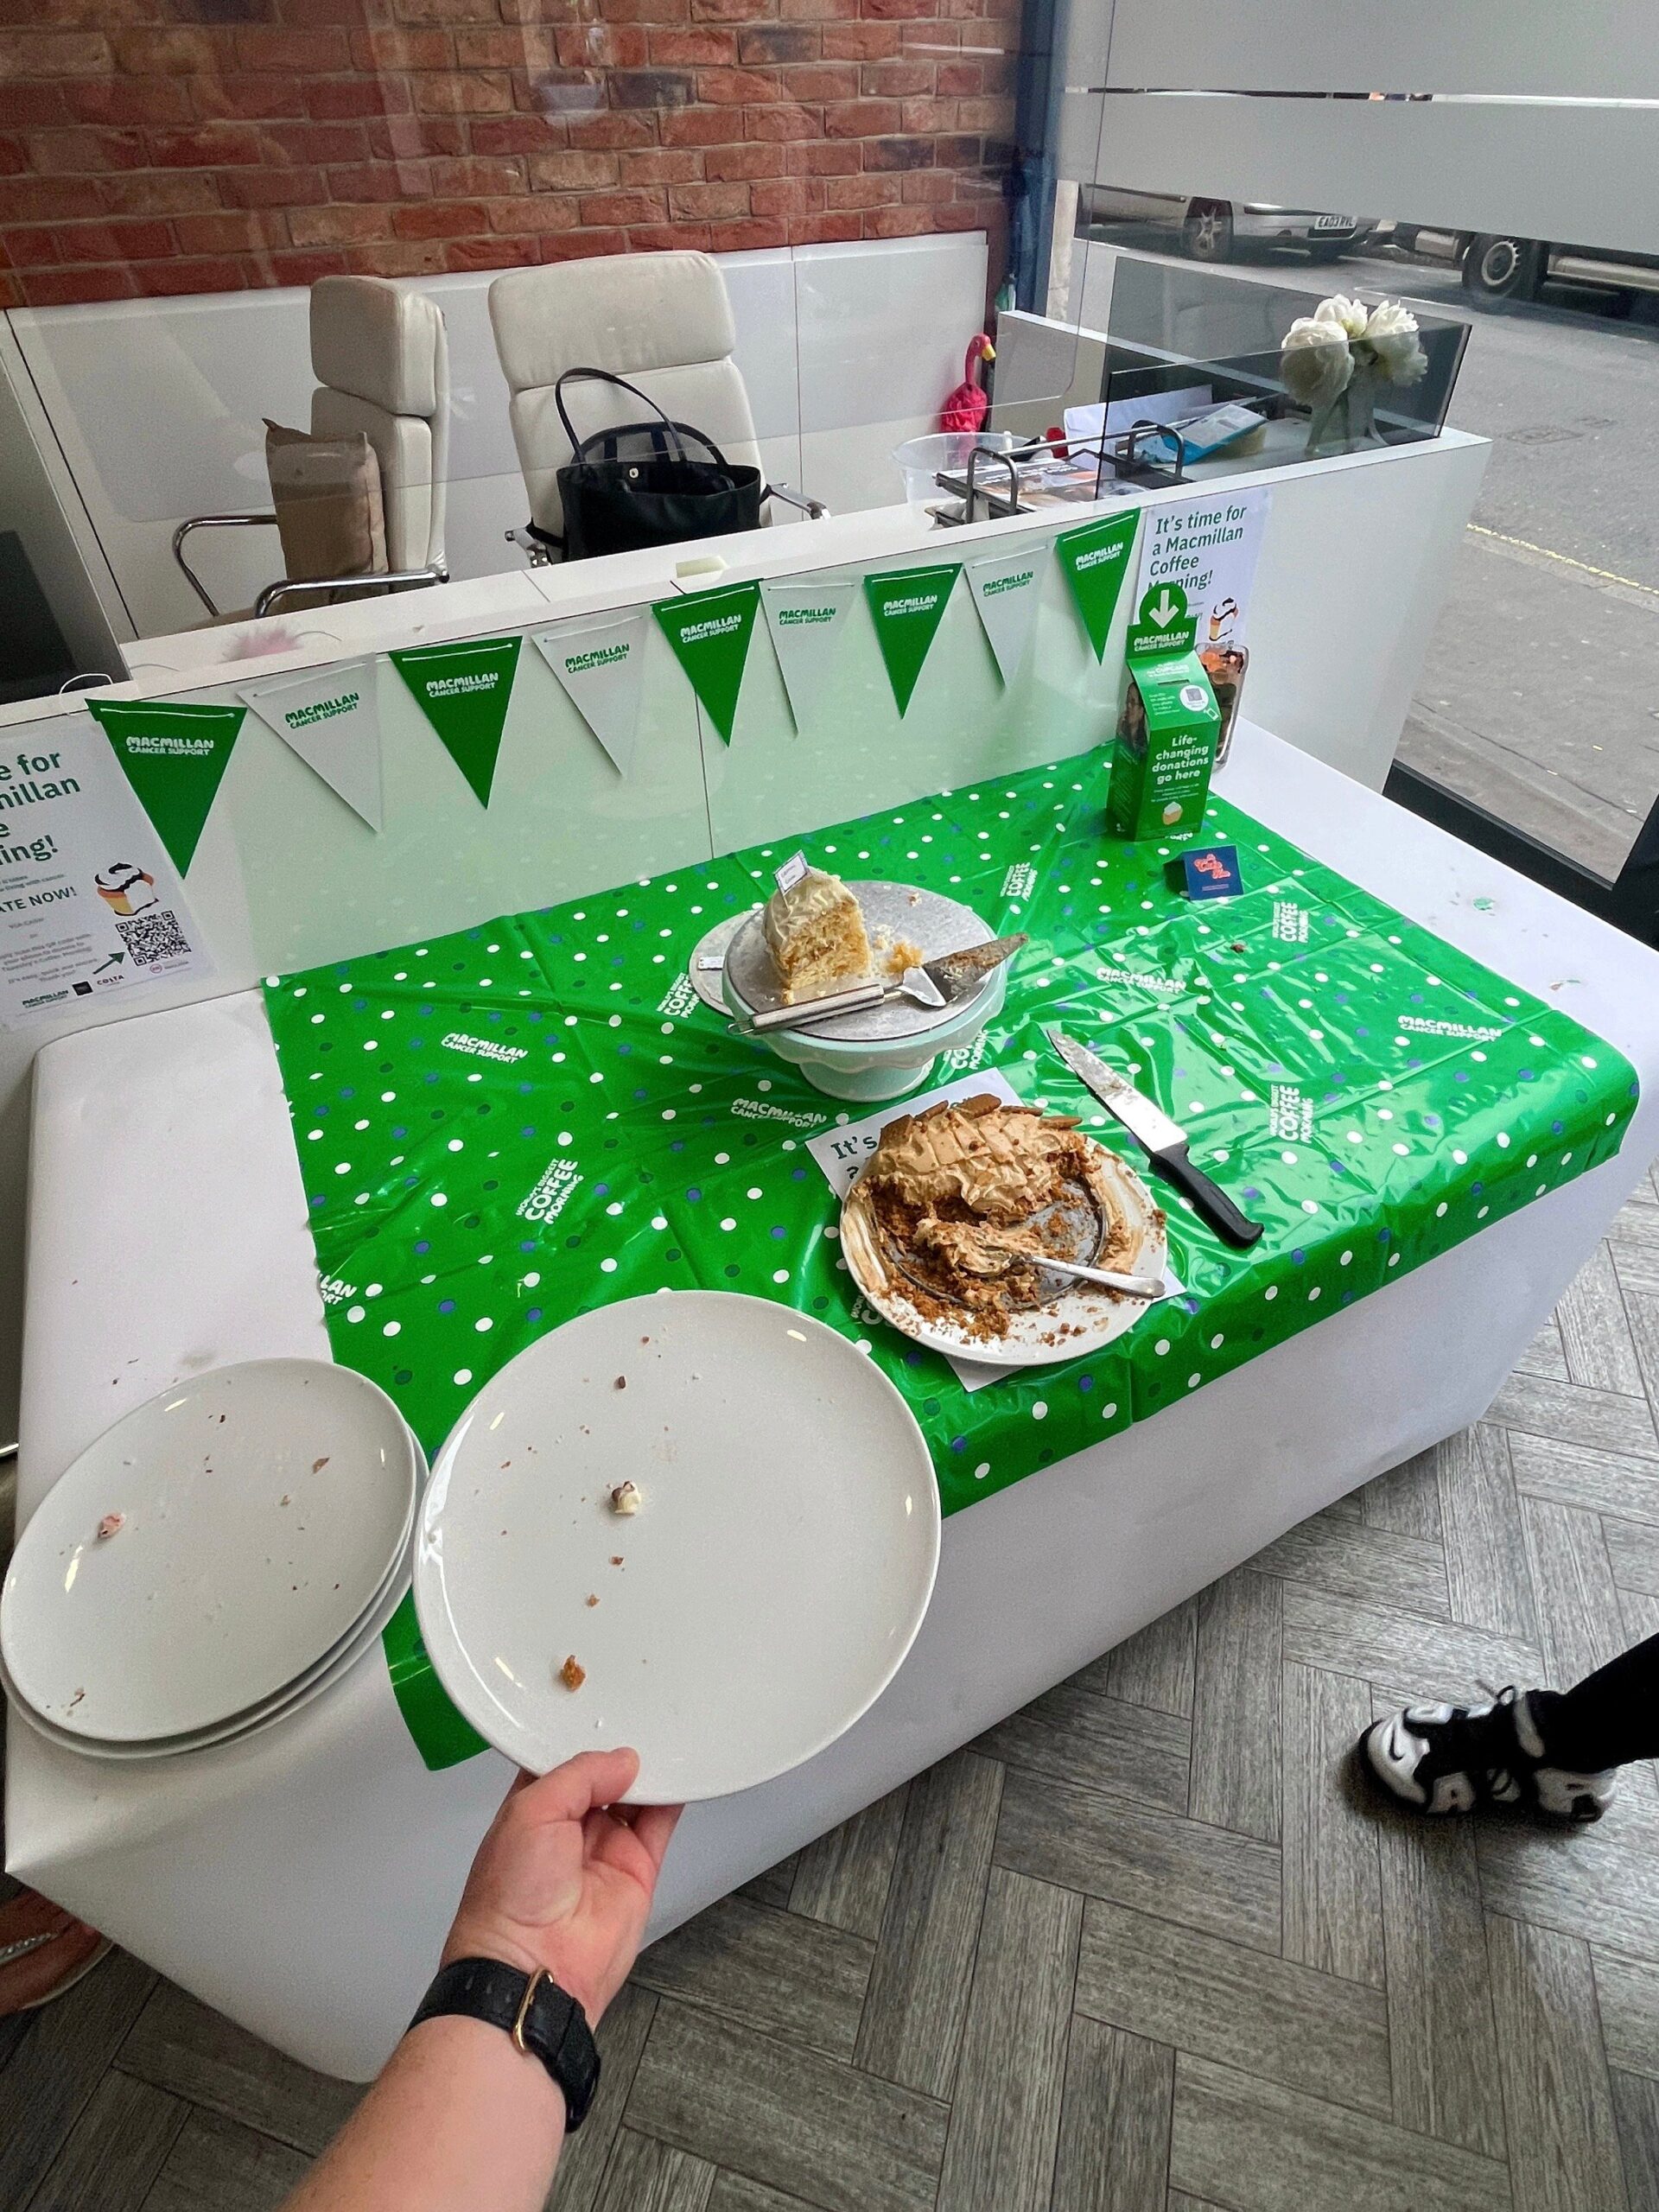 Tapestry-soho-frith-street-london-macmillan-cancer-support-the-worlds-biggest-coffee-morning-research-charity-bake-sale-fundraiser-autumn 